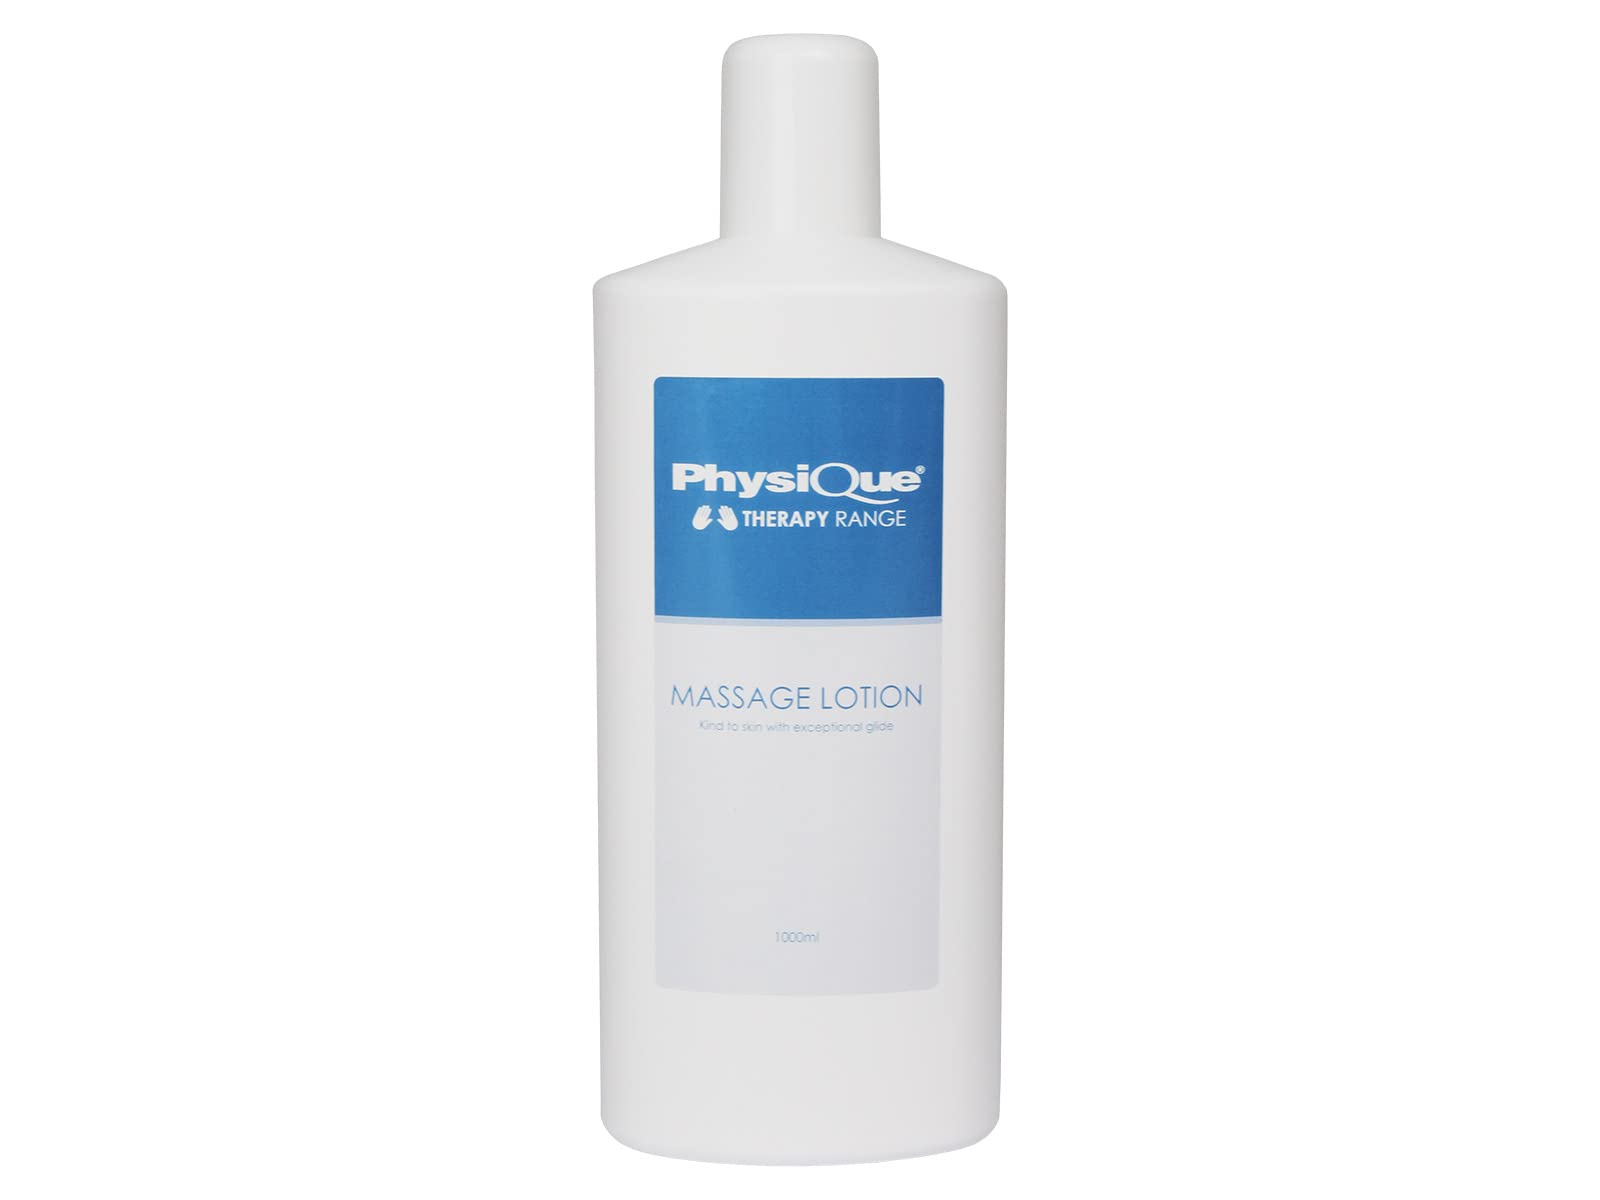 Physique Massage Lotion 1000ml - Lightly Oiled Hydrating Recovery Lotion - Perfect for Sports, Spa and Physiotherapy -Works for All Types of Massage